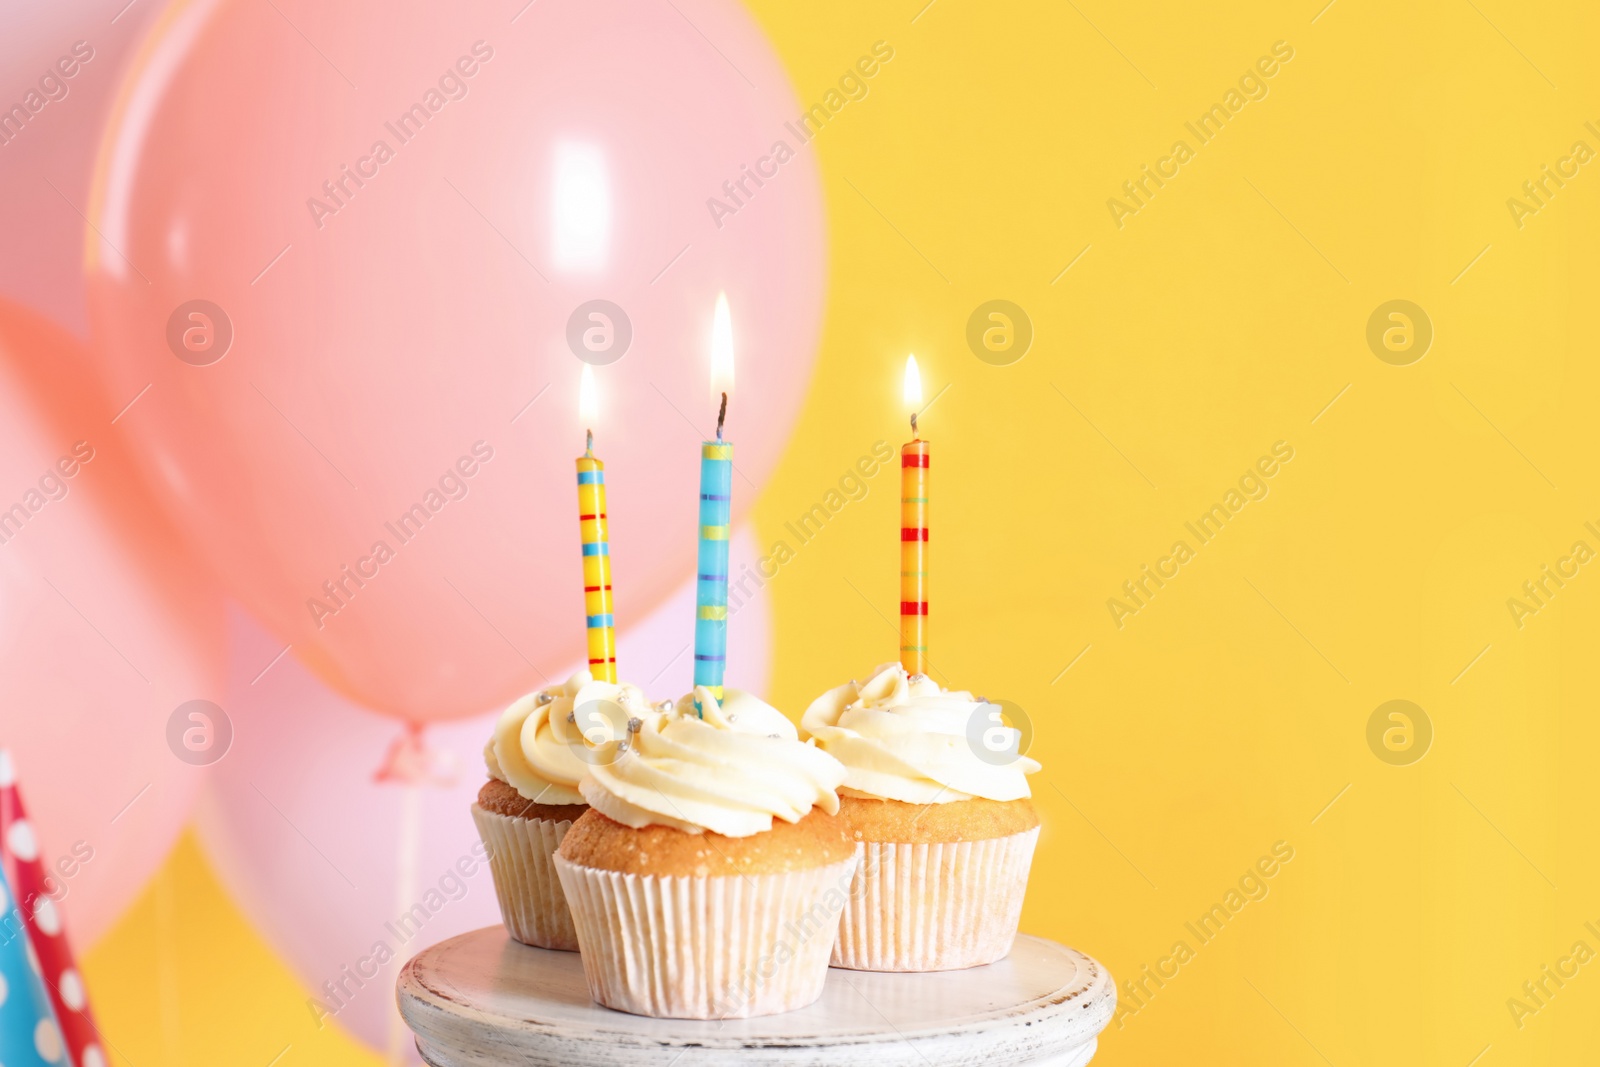 Photo of Stand with birthday cupcakes and party balloons on color background. Space for text